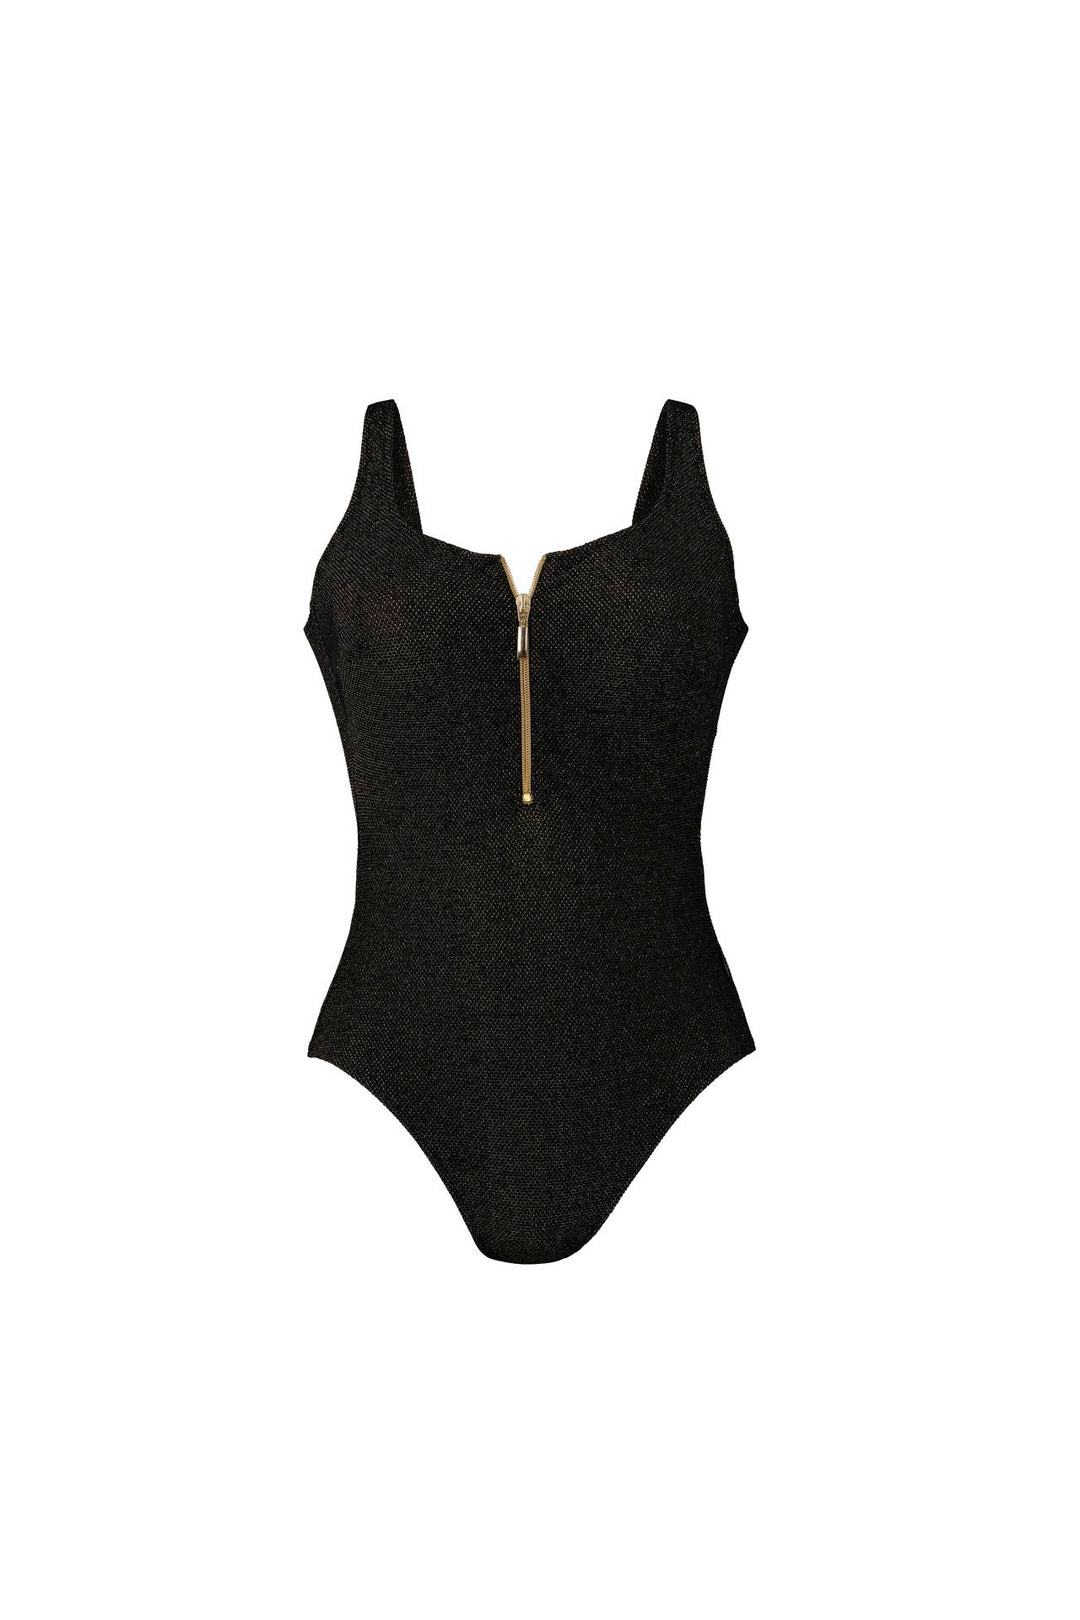 Sparkling Sand Elouise One-Piece Zip Front Swimsuit - Size E 14